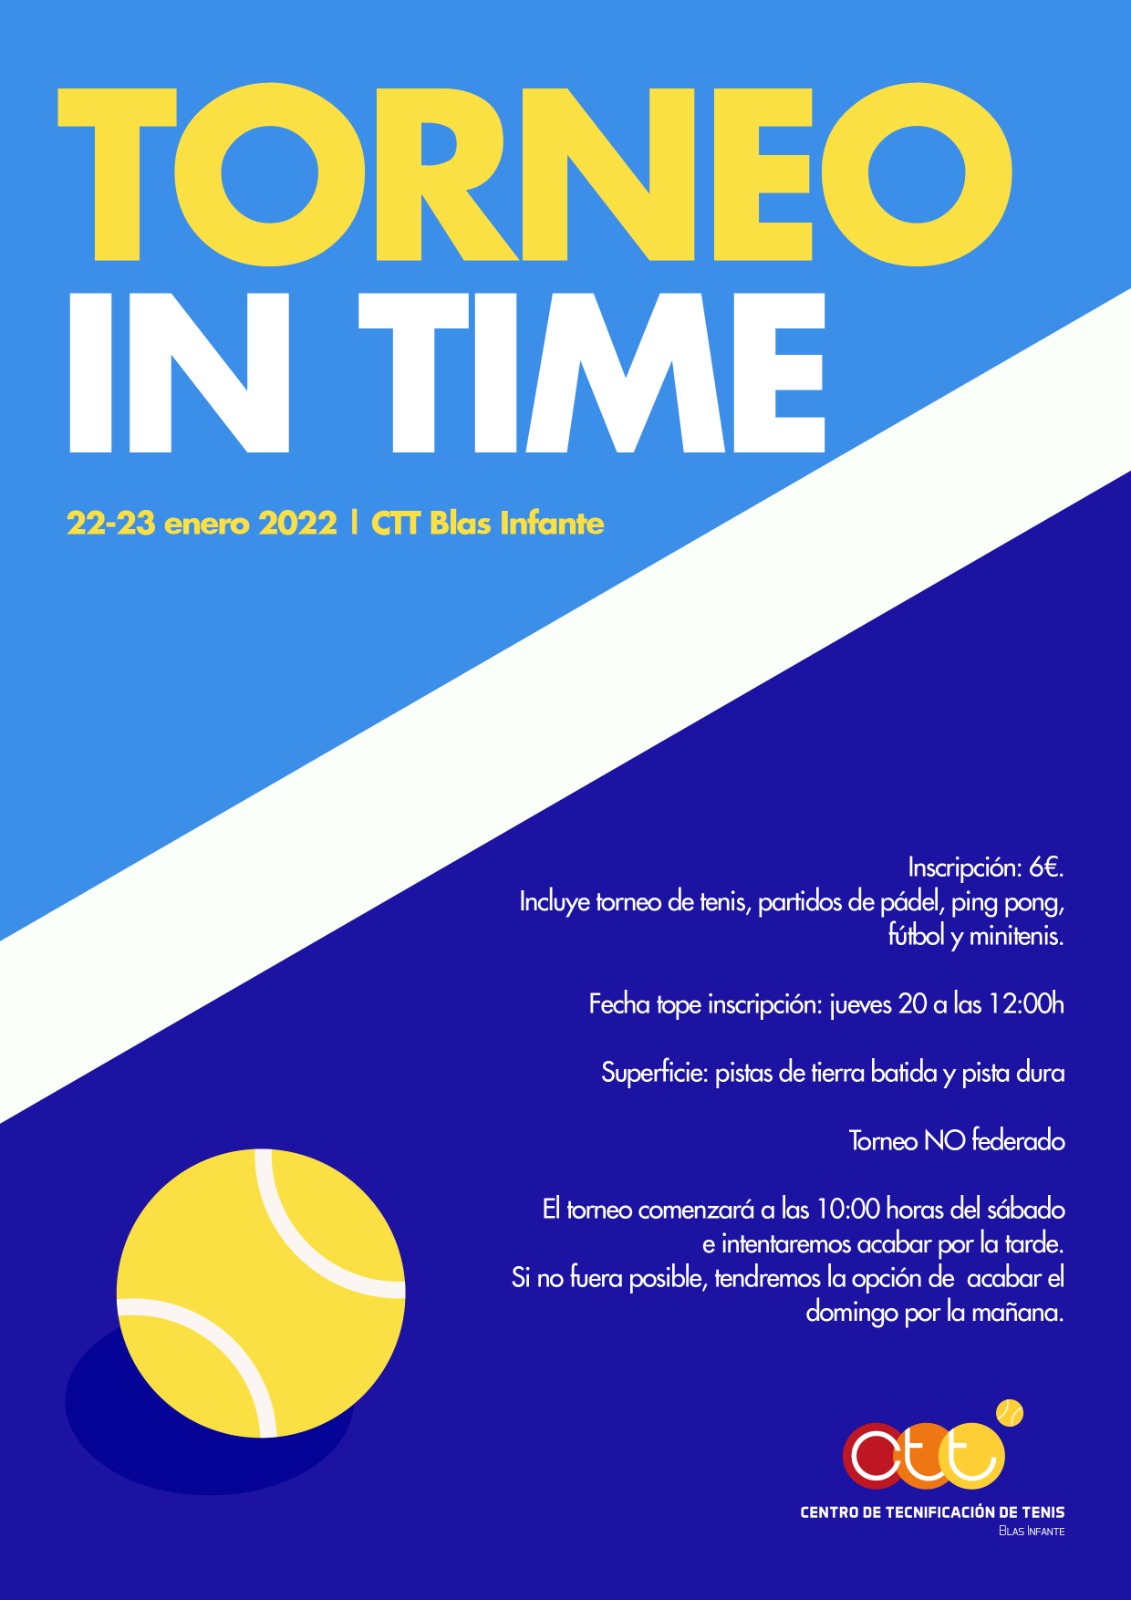 TORNEO "IN TIME"